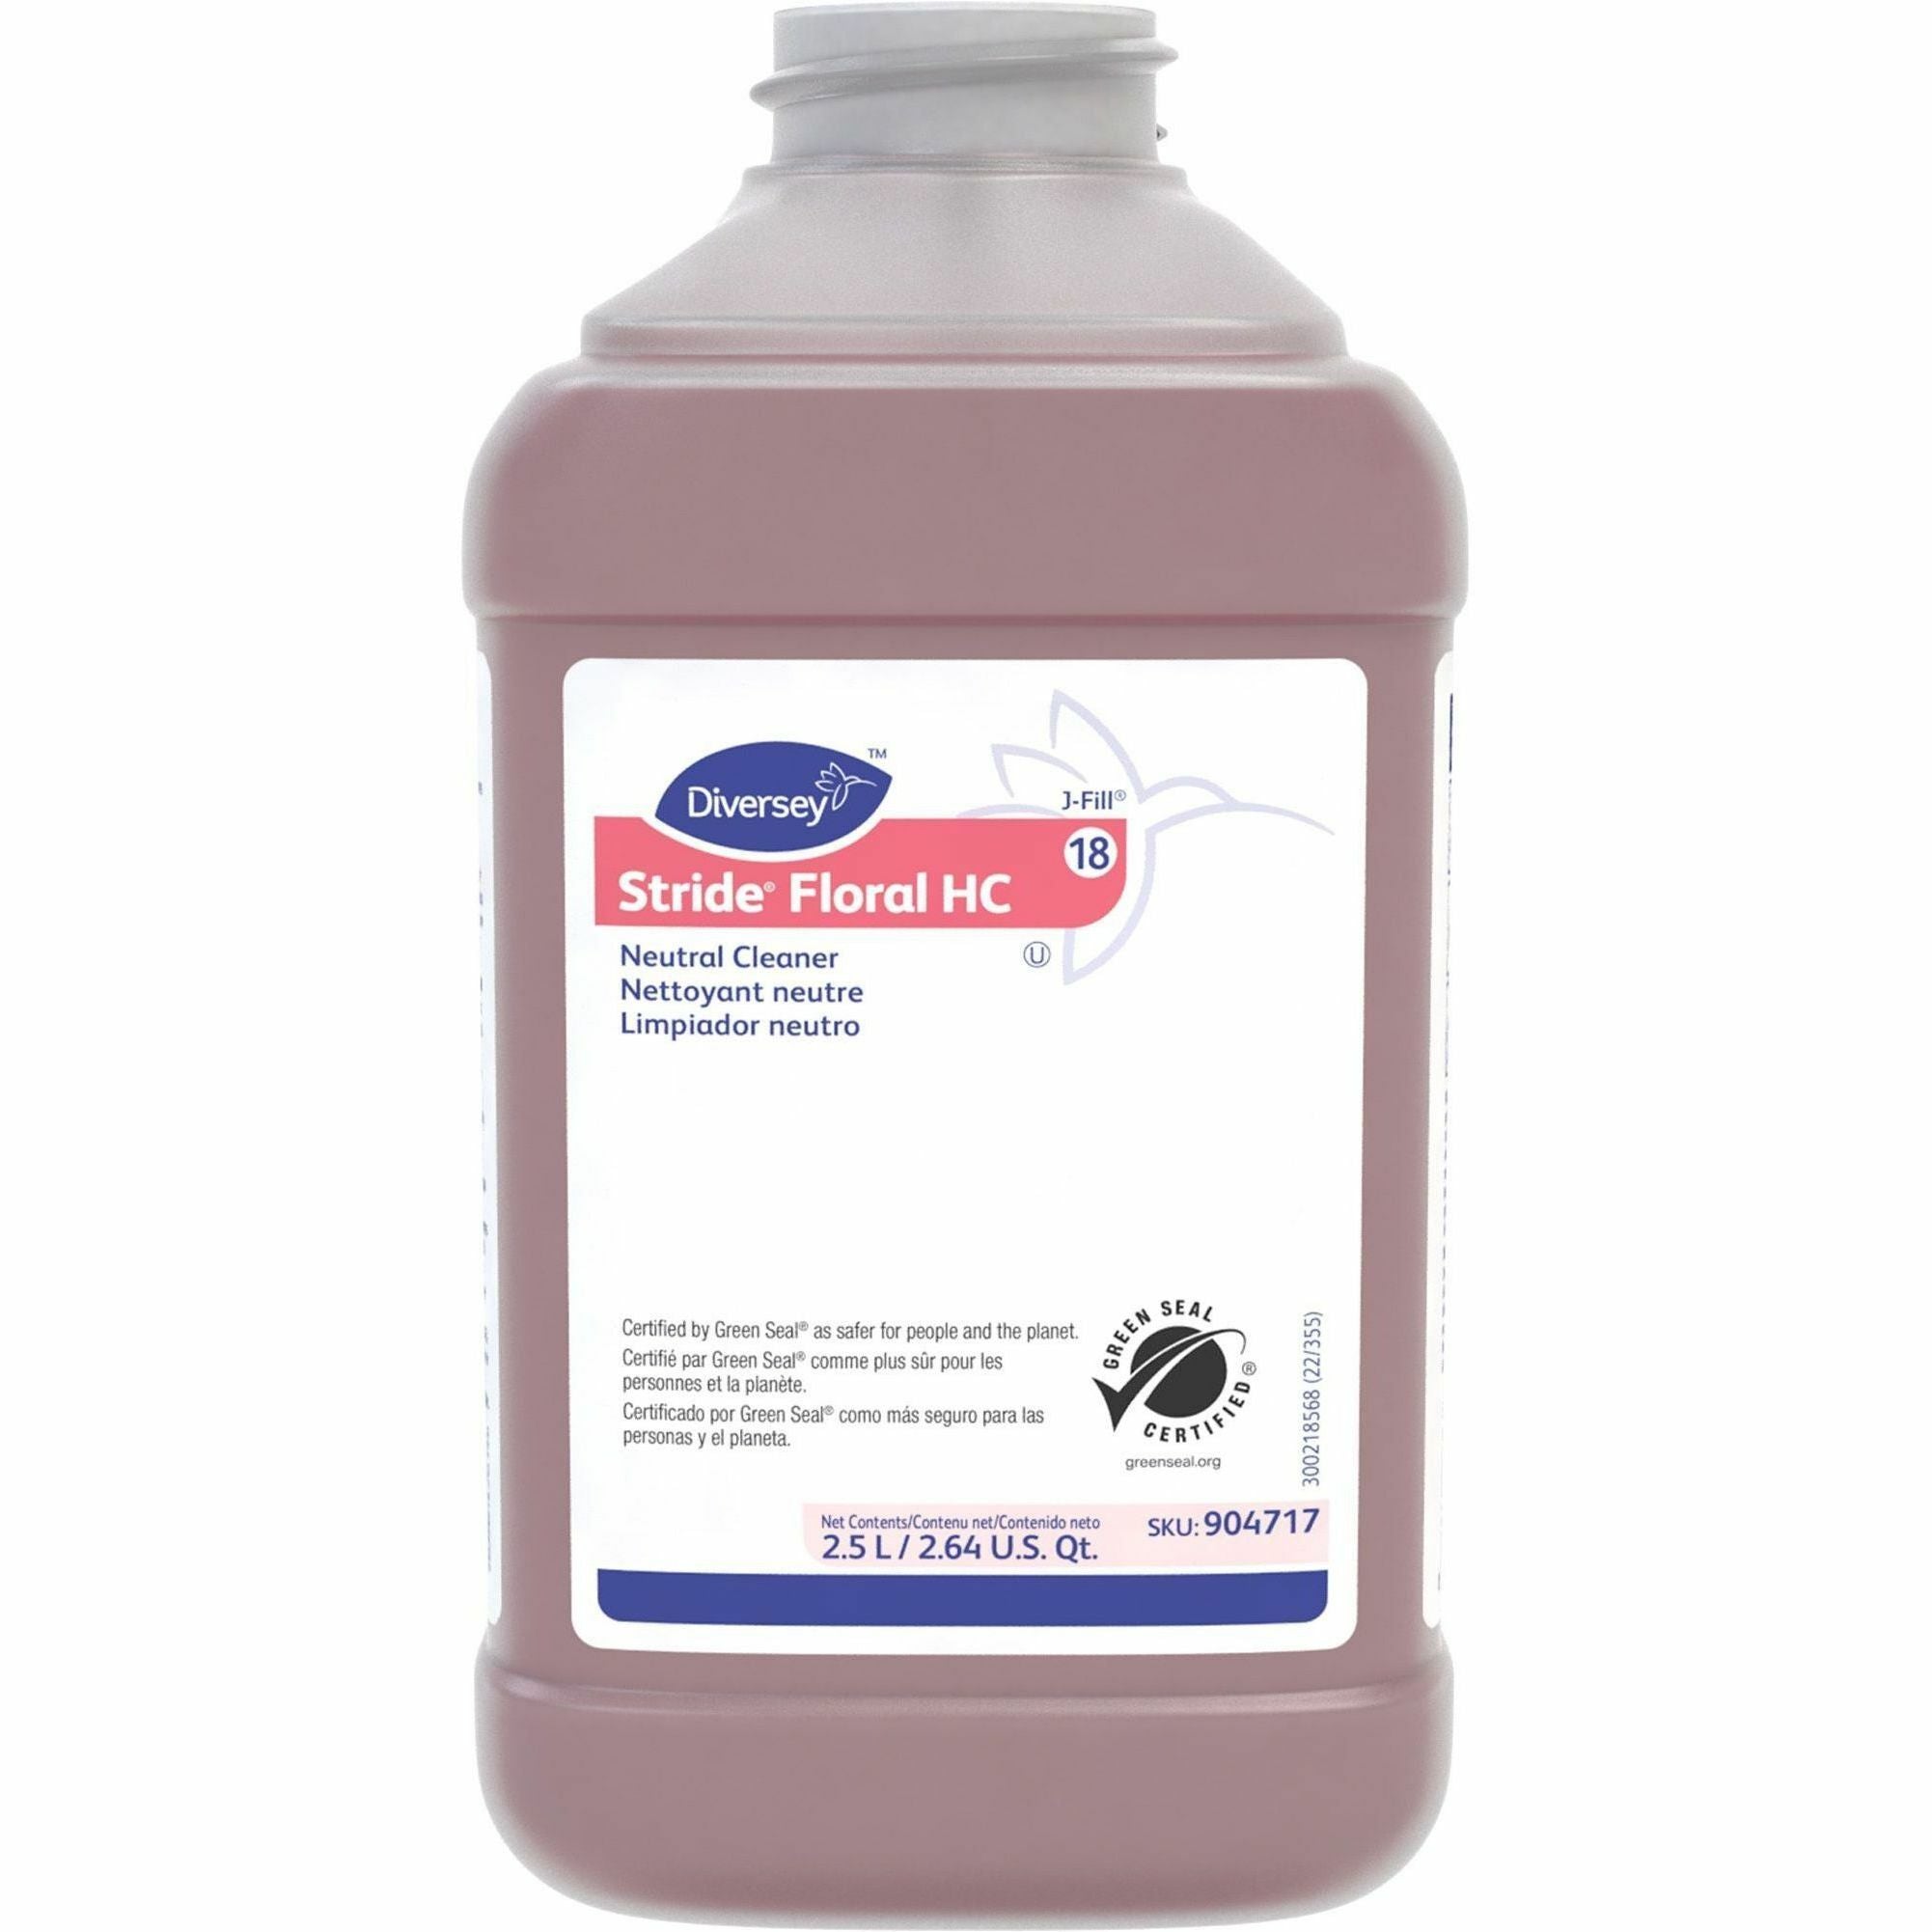 diversey-stride-floral-hc-neutral-cleaner-concentrate-845-fl-oz-26-quart-floral-scent-2-carton-rinse-free-non-alkaline-film-free-low-foaming-pleasant-scent-kosher-red_dvo904717 - 2